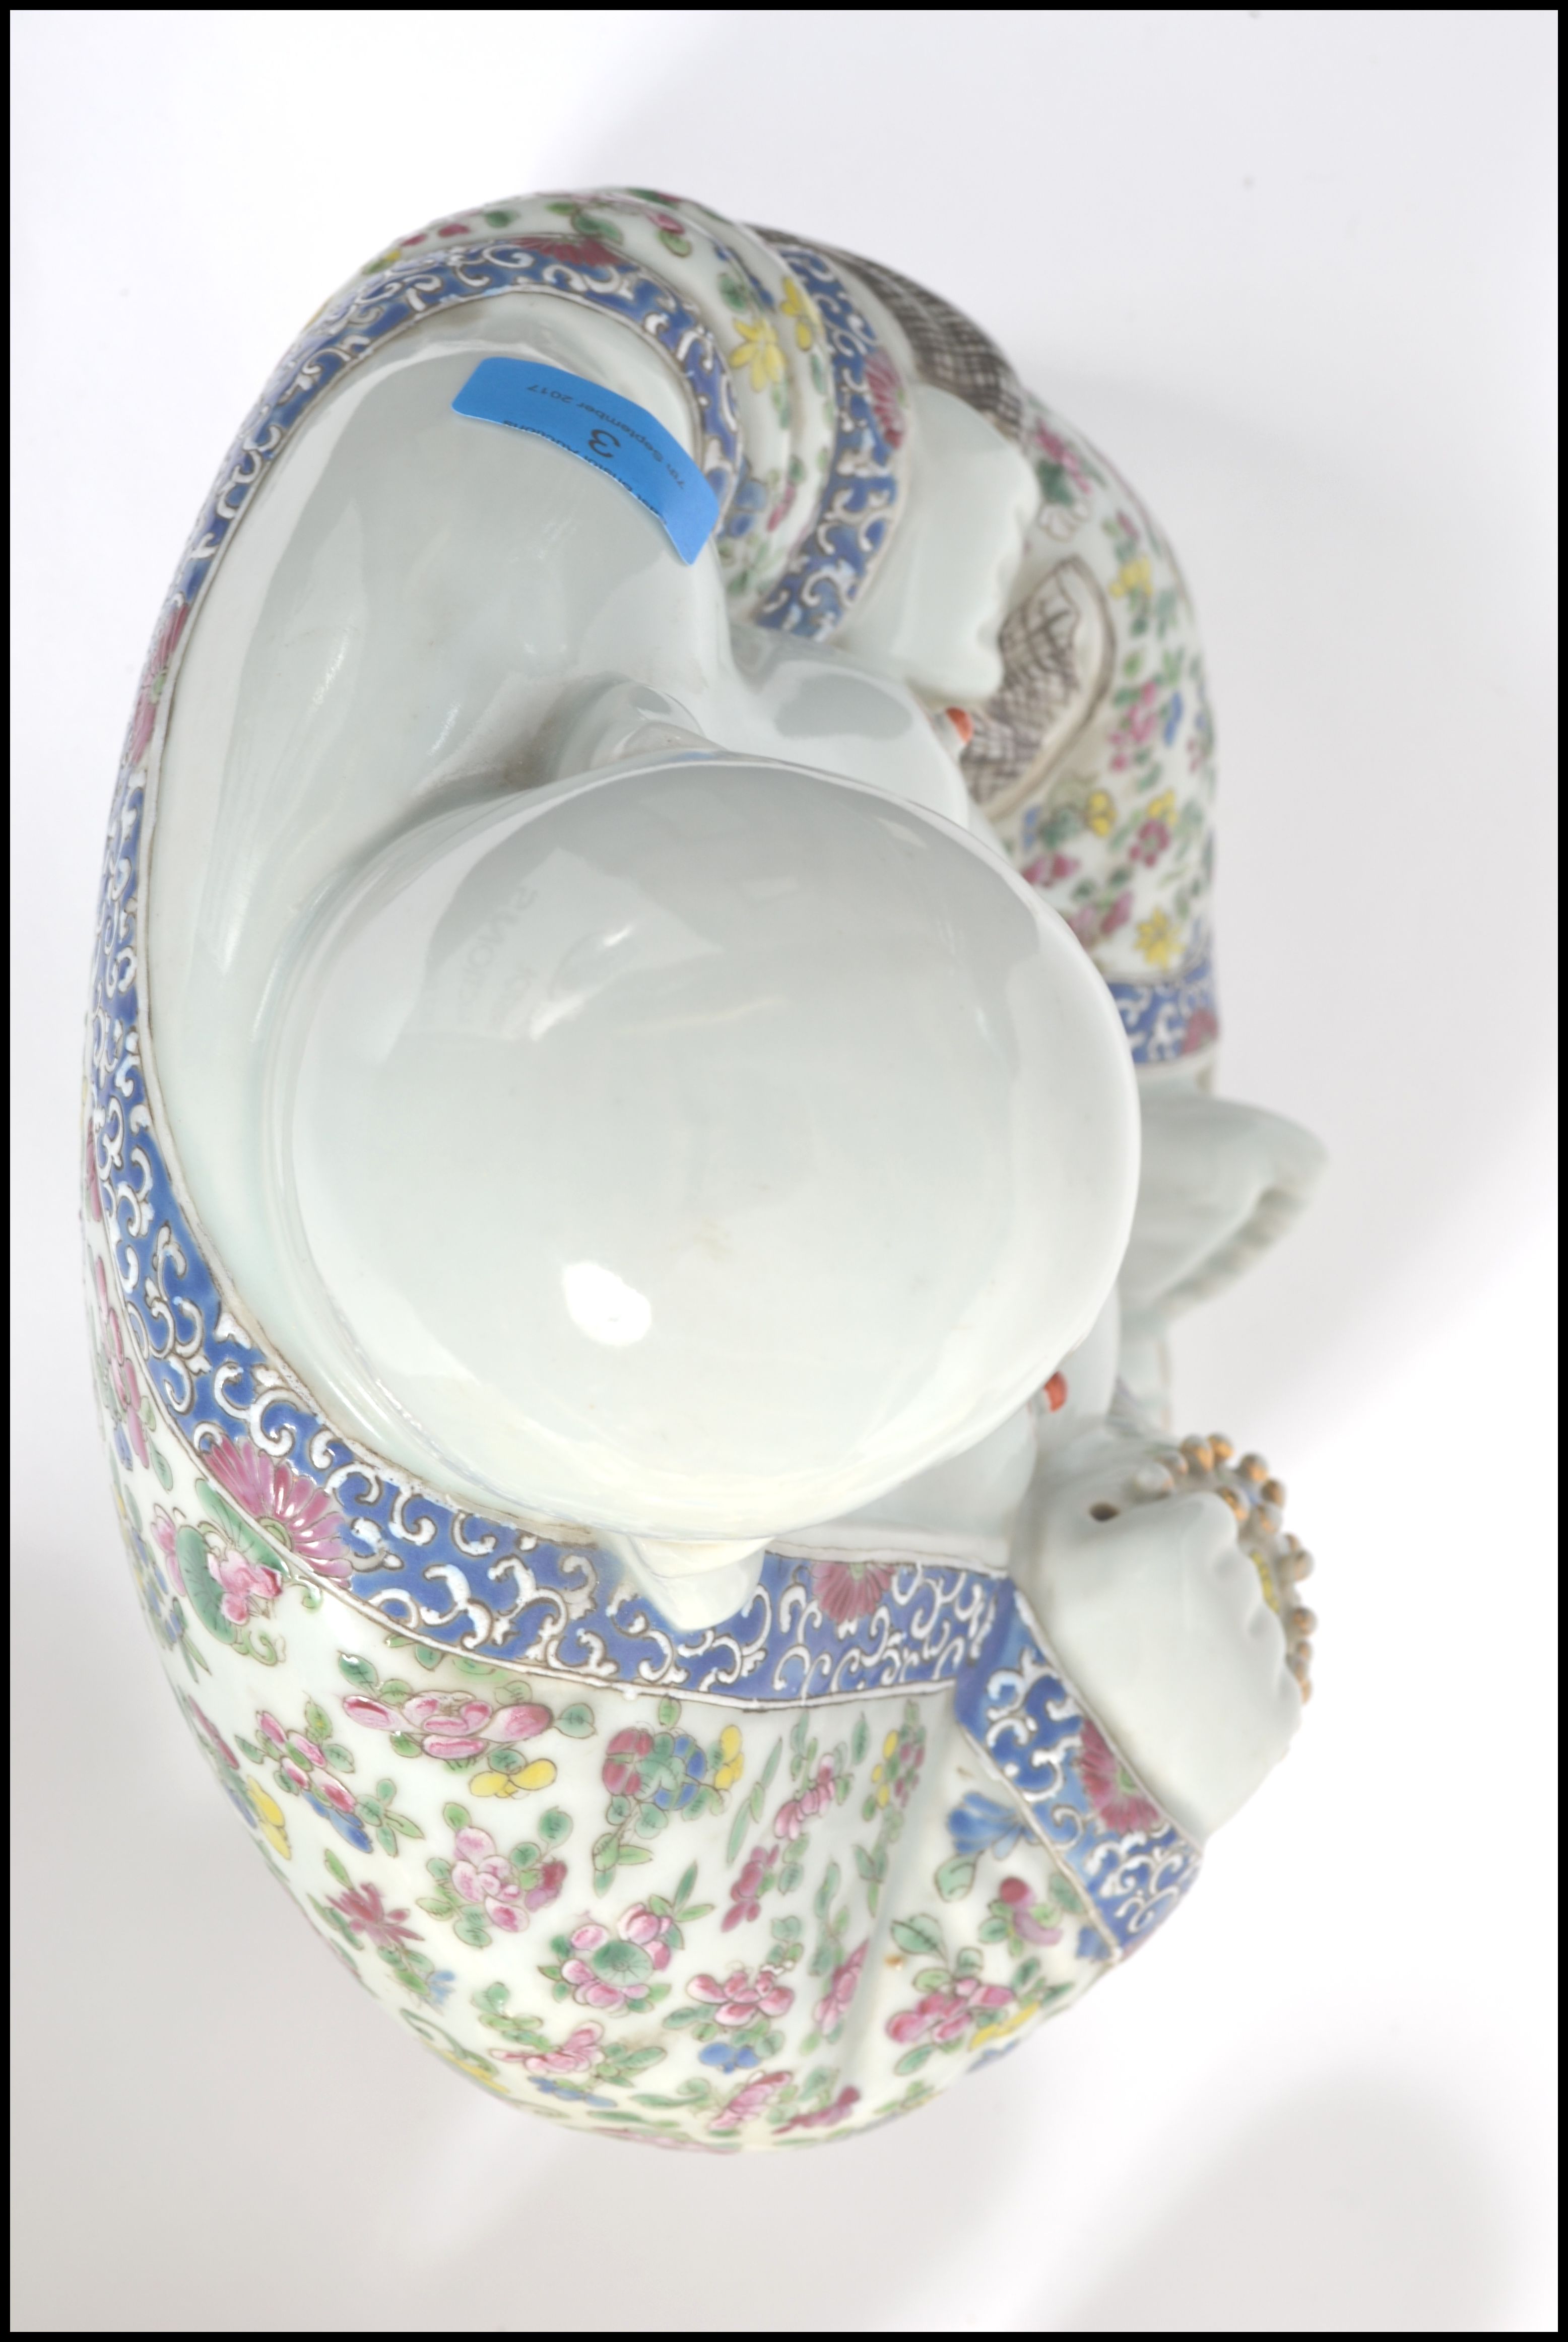 An Oriental ceramic large seated laughing Buddha decorated in famille rose patterned robes holding - Image 8 of 8